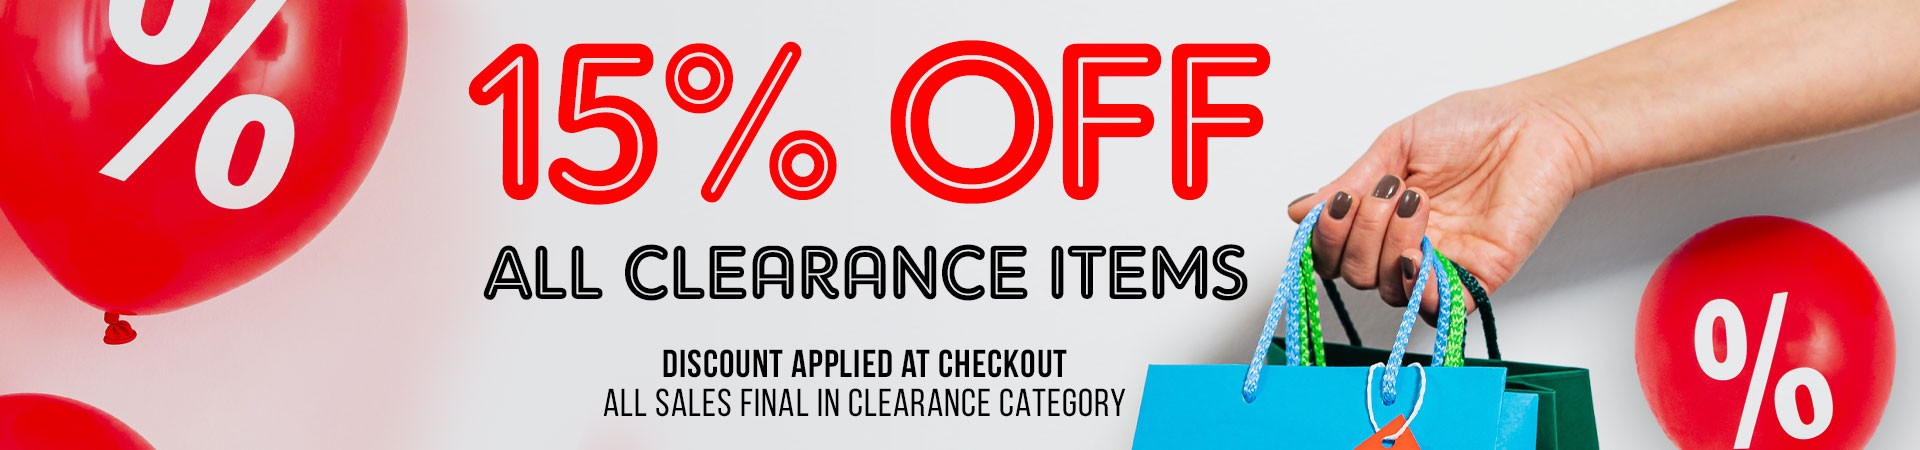 15% Off Clearance - Discount Applied At Checkout